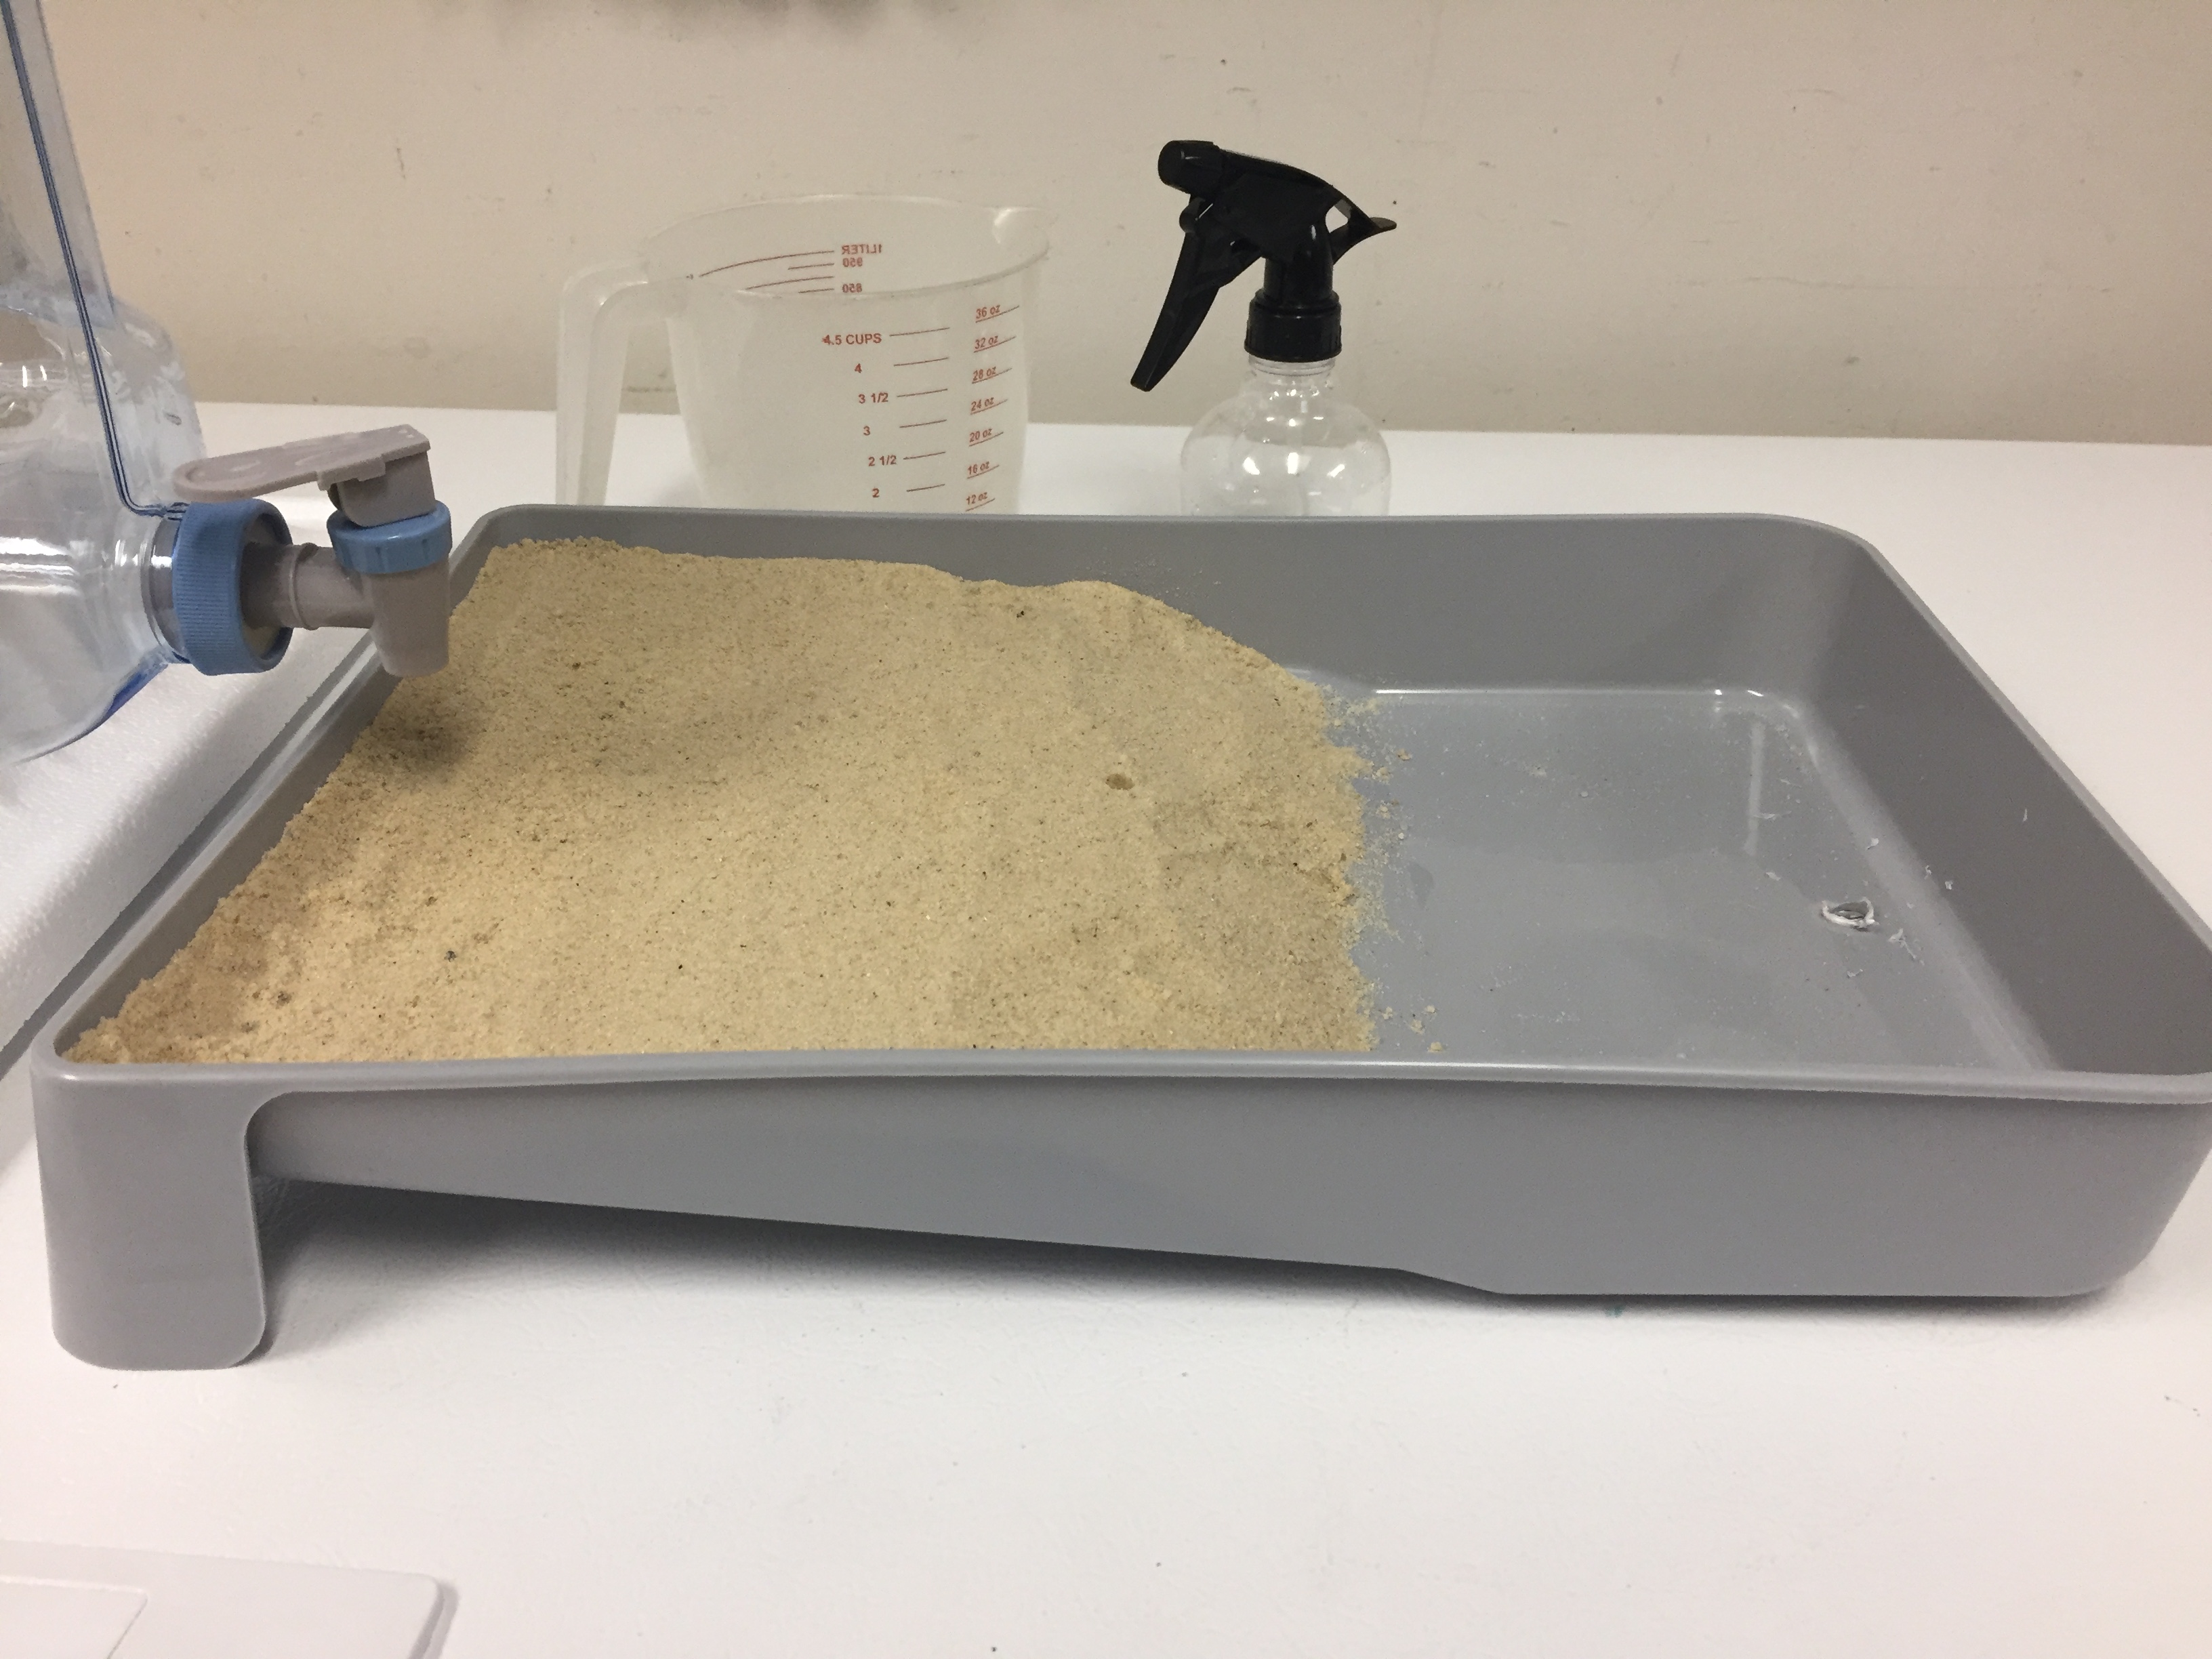 A photo showing the correct amount of sand to add to the stream table, filling about two thirds of the tray, with a layer of sand about one inch thick.